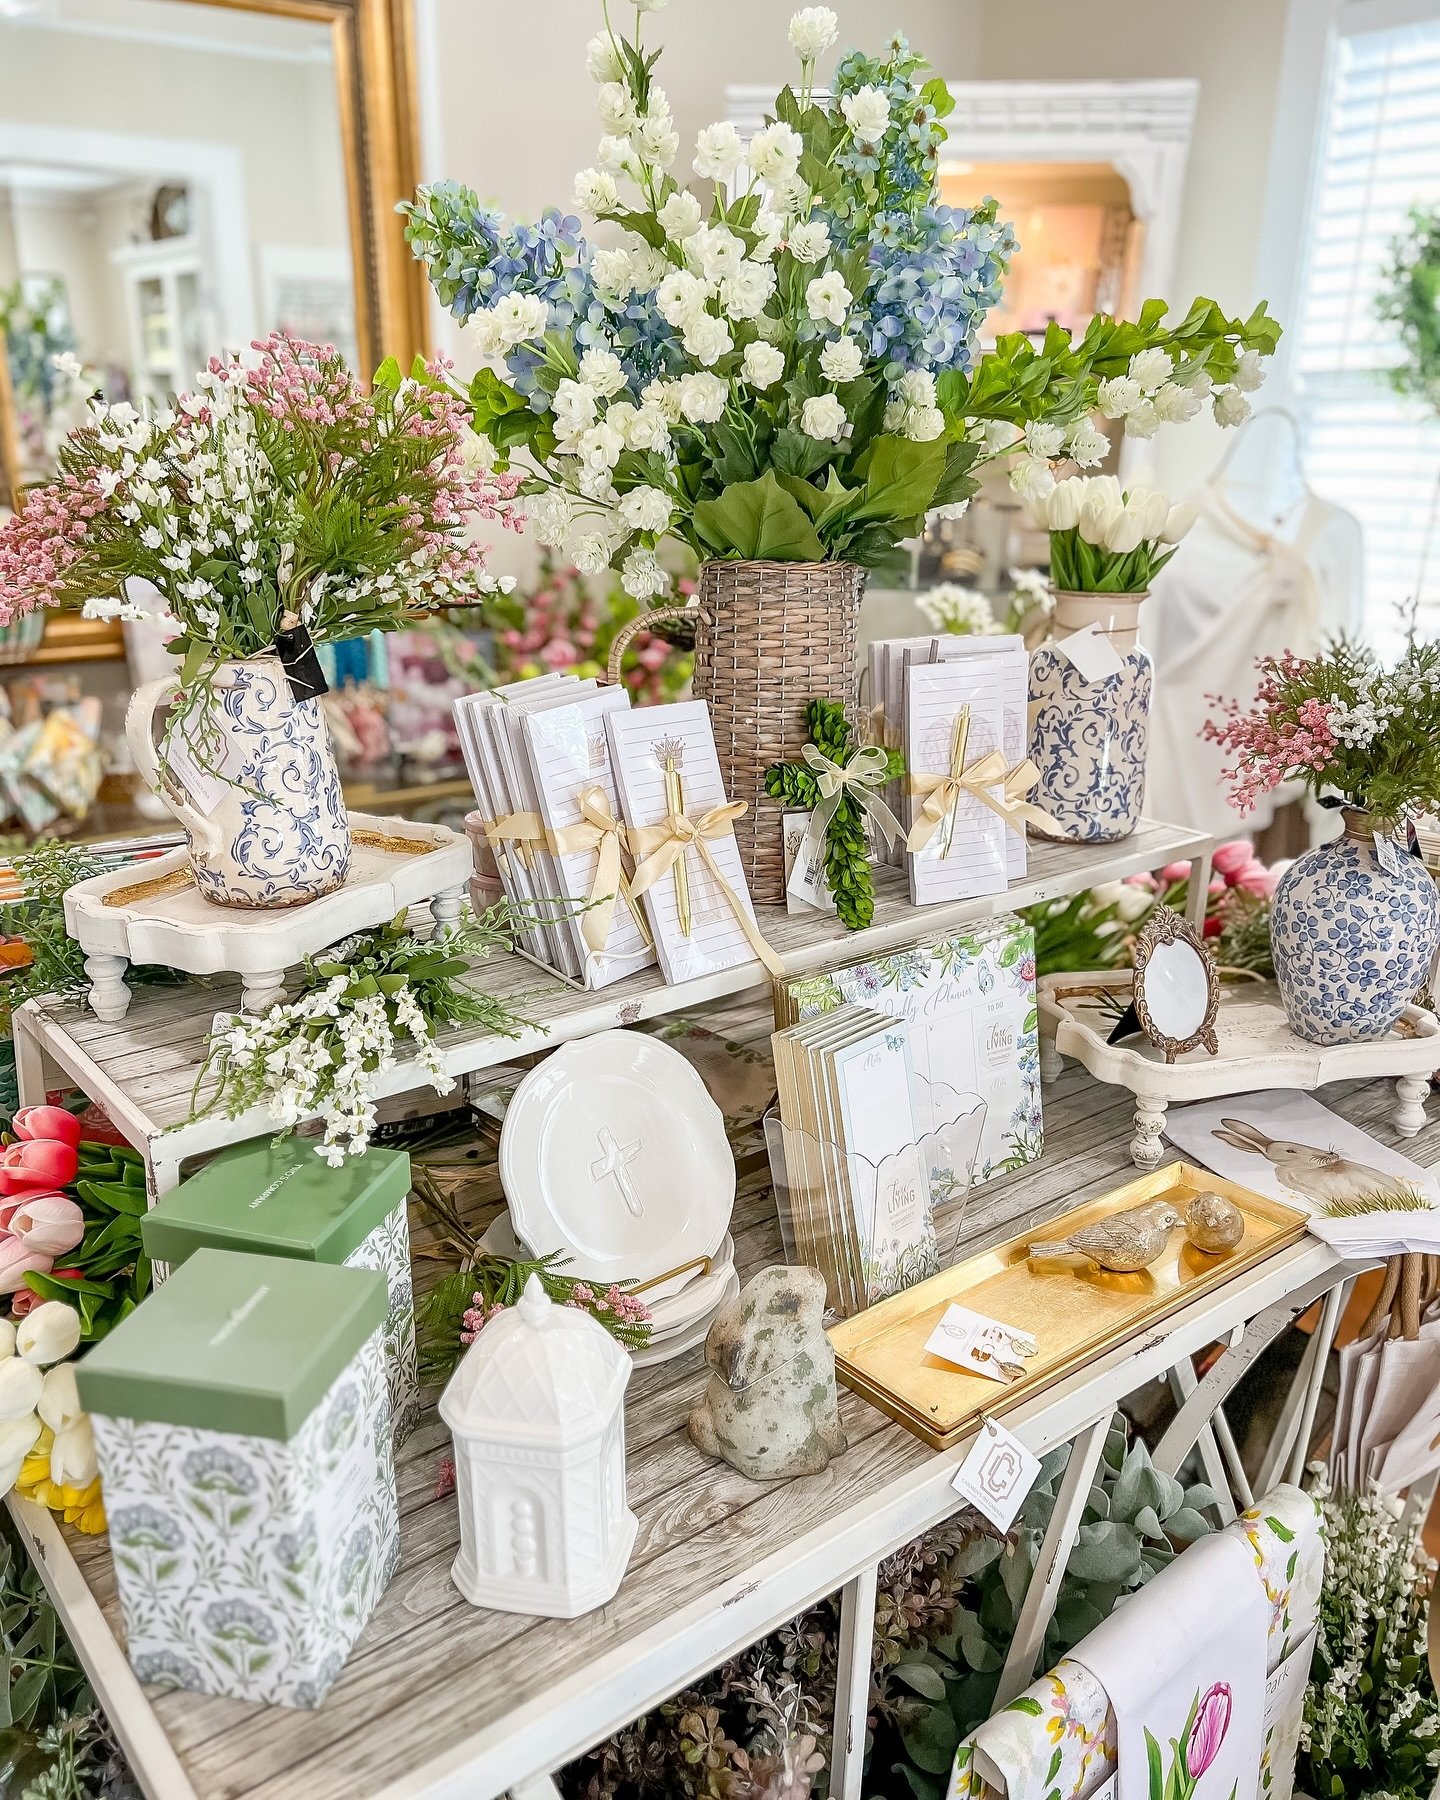 It is a beautiful Saturday!☀️ Come shop!! 🛍️✨ Mother&rsquo;s Day is in 2 weeks!! 𝙊𝙥𝙚𝙣 until 𝟮𝙥𝙢 today!⁣
⁣
Carmen&rsquo;s on Carolina⁣
1631 Carolina Avenue⁣
Orangeburg, SC⁣
⁣
⁣